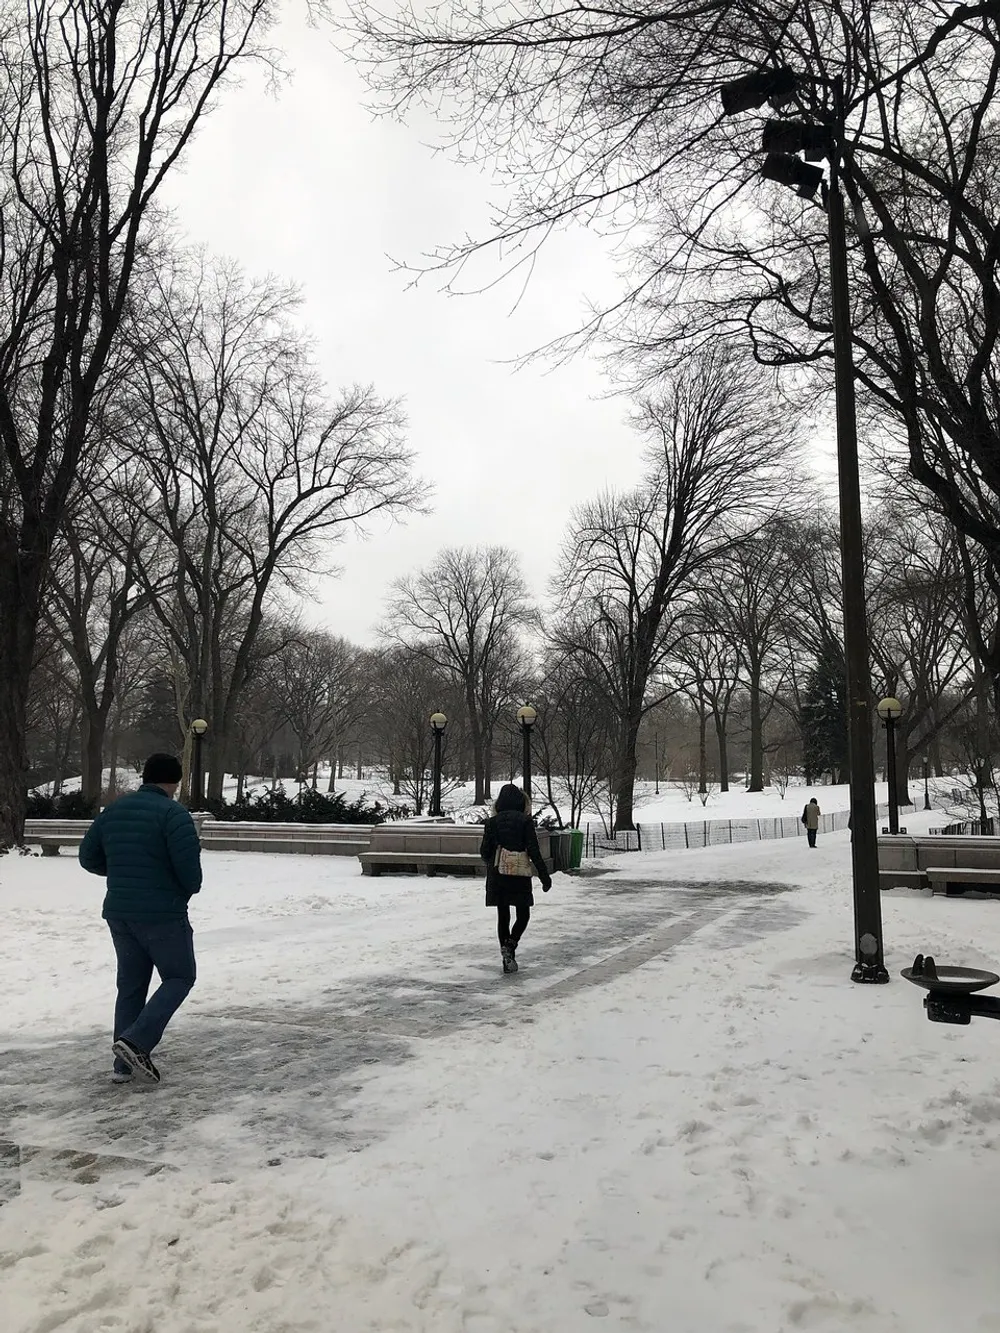 People walk through a snowy park with bare trees on an overcast day